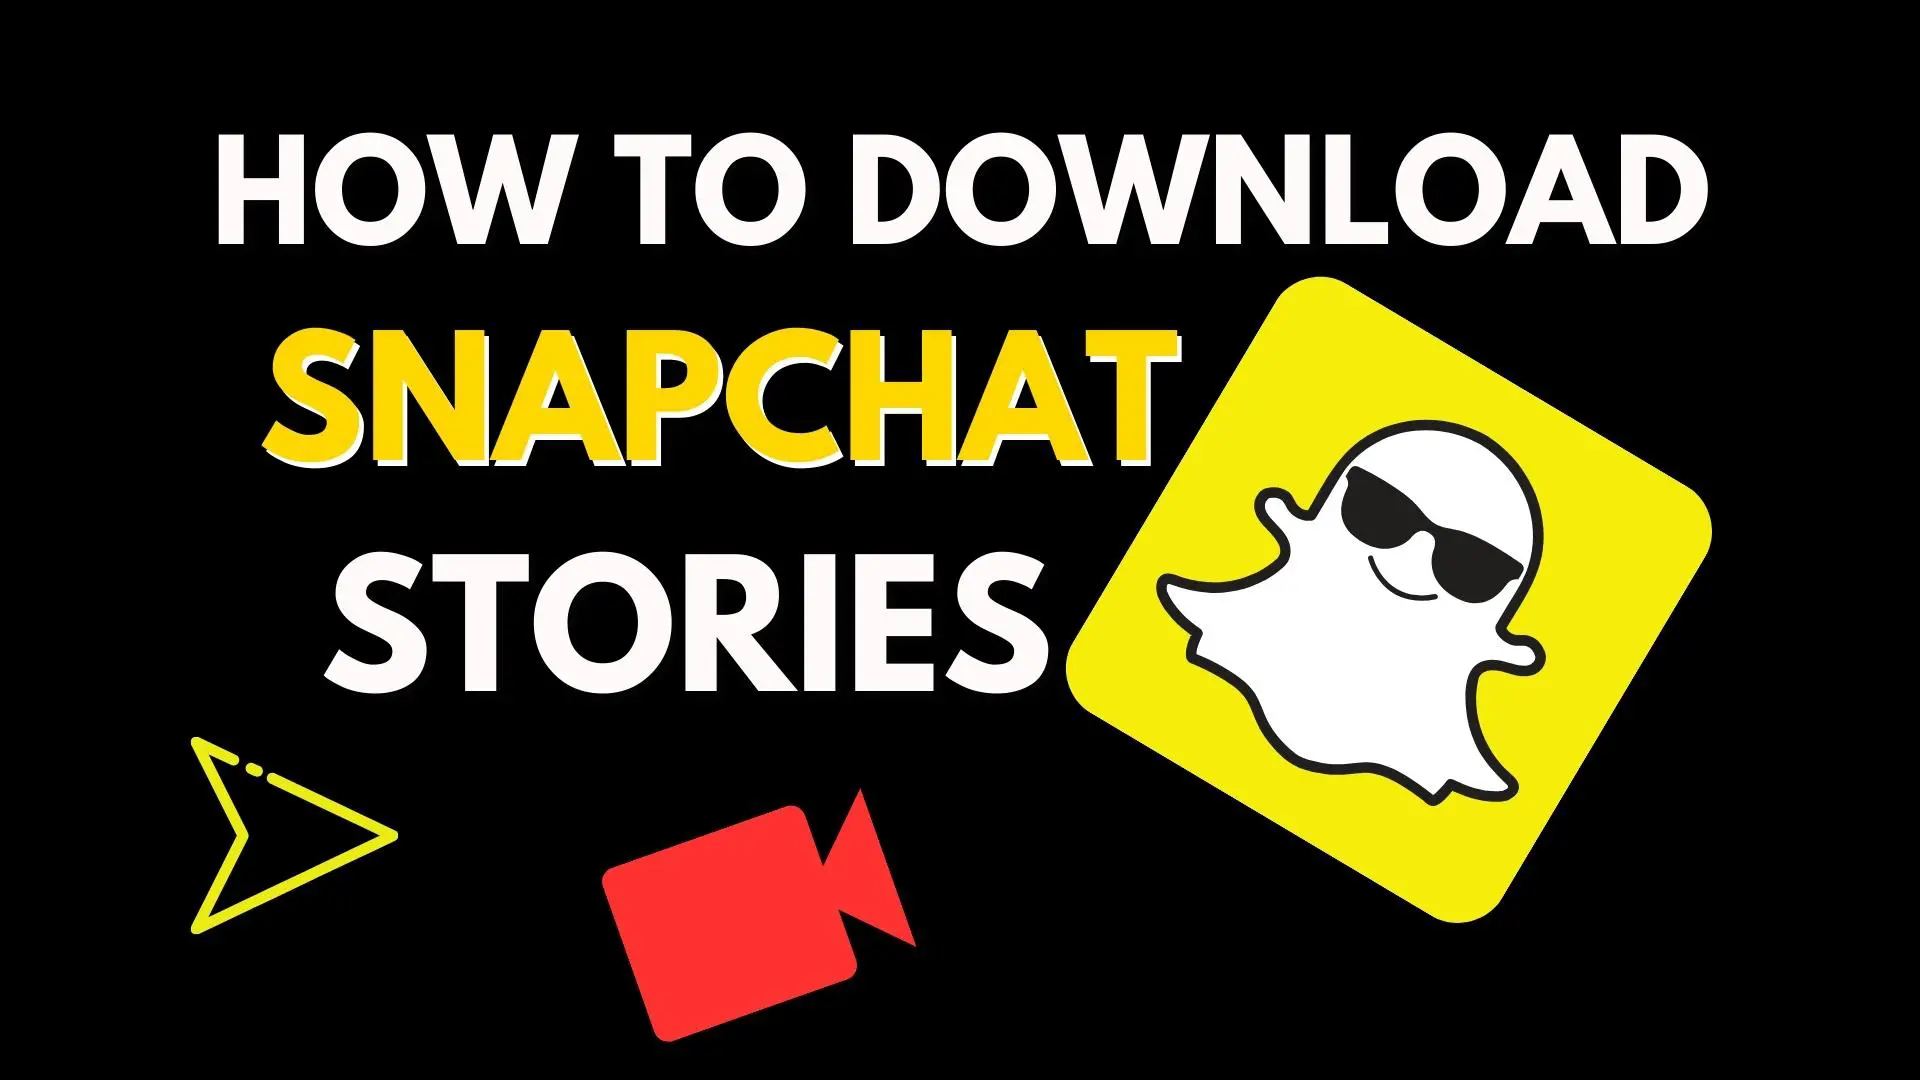 How to Download Snapchat Stories | 3 Easy Steps